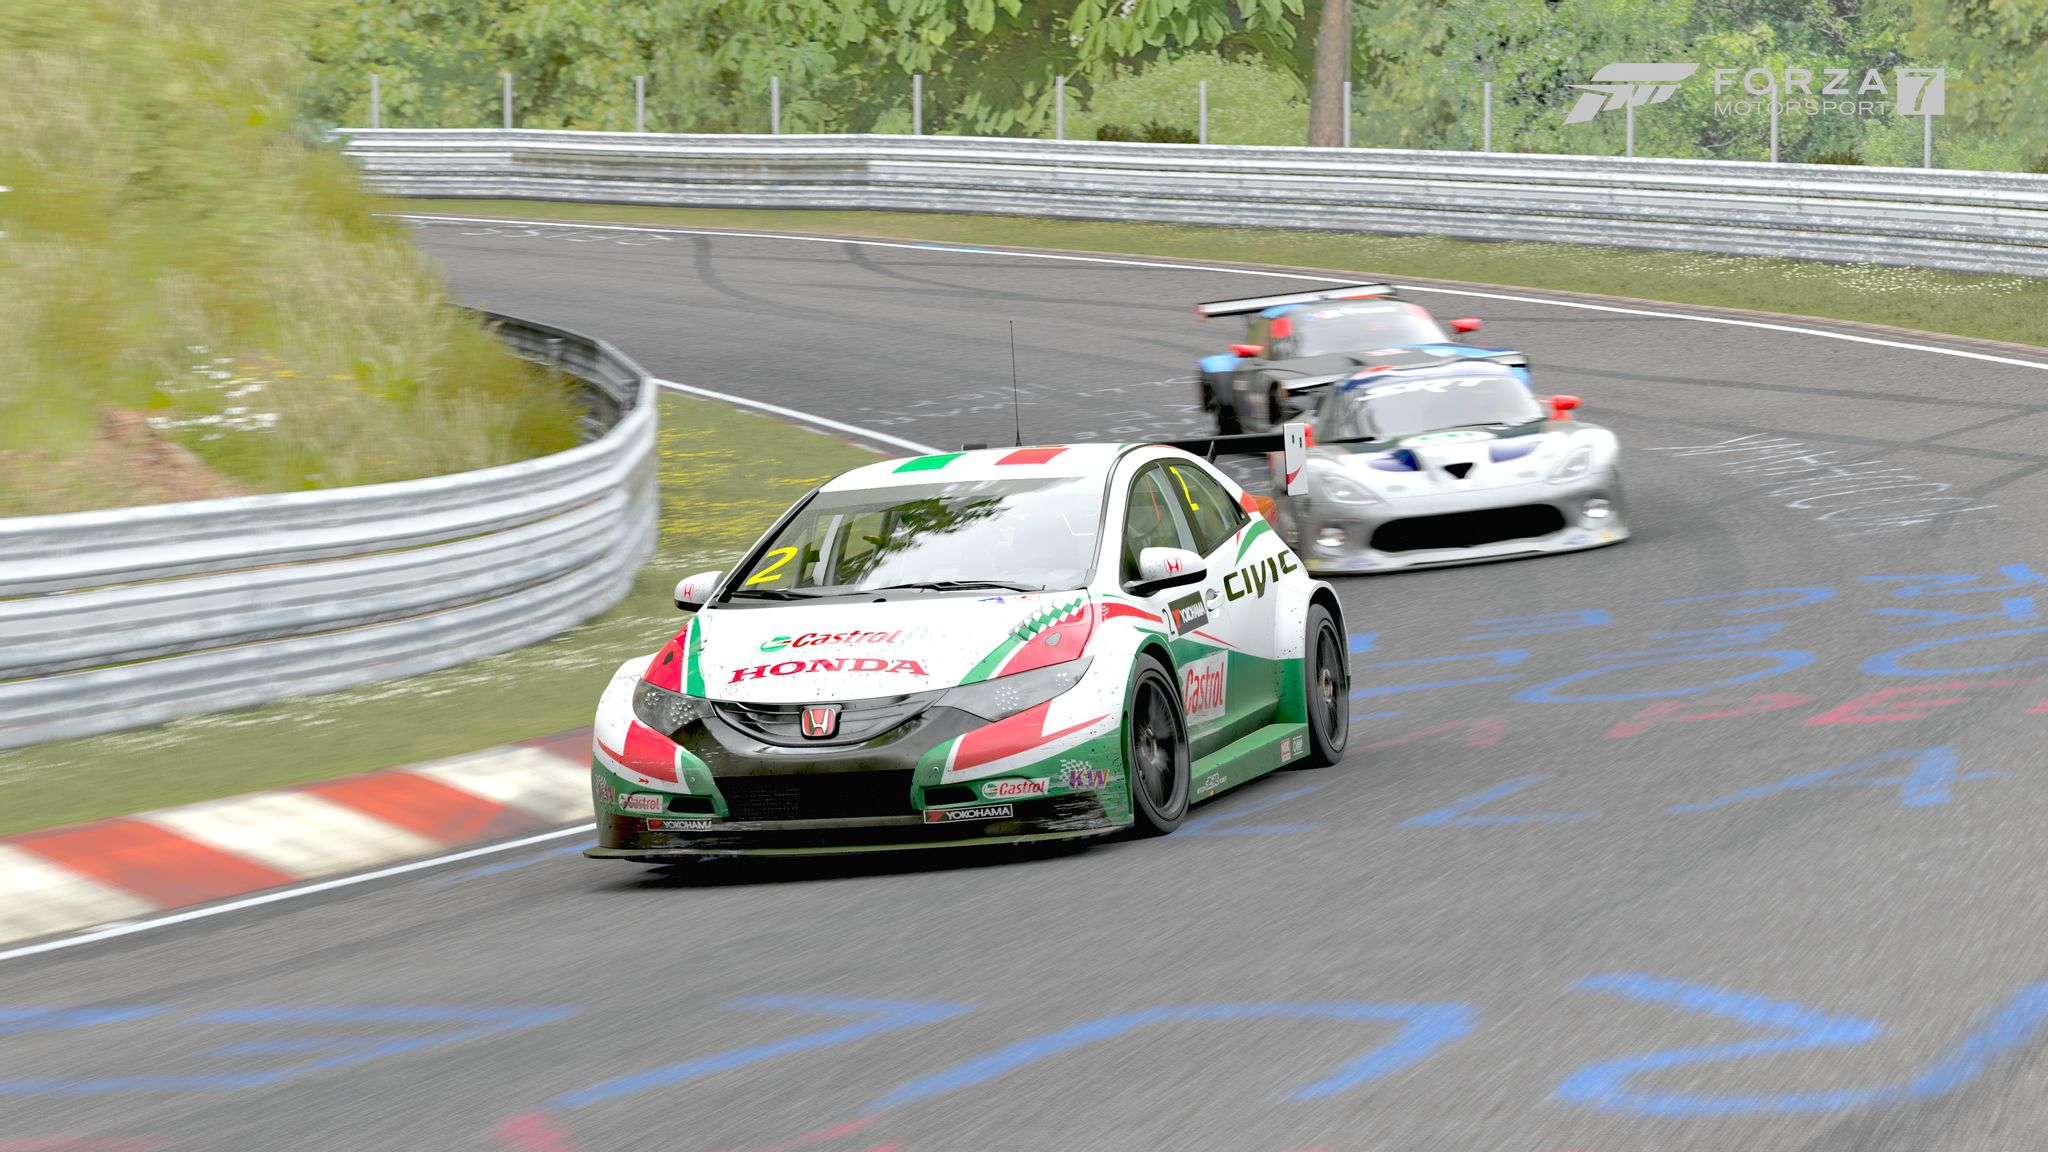 A screenshot from Forza Motorsport 7 showing a racing-spec Honda Civic Type R with full racing wheels and front and rear spoilers going around a corner, closely pursued by two other cars.